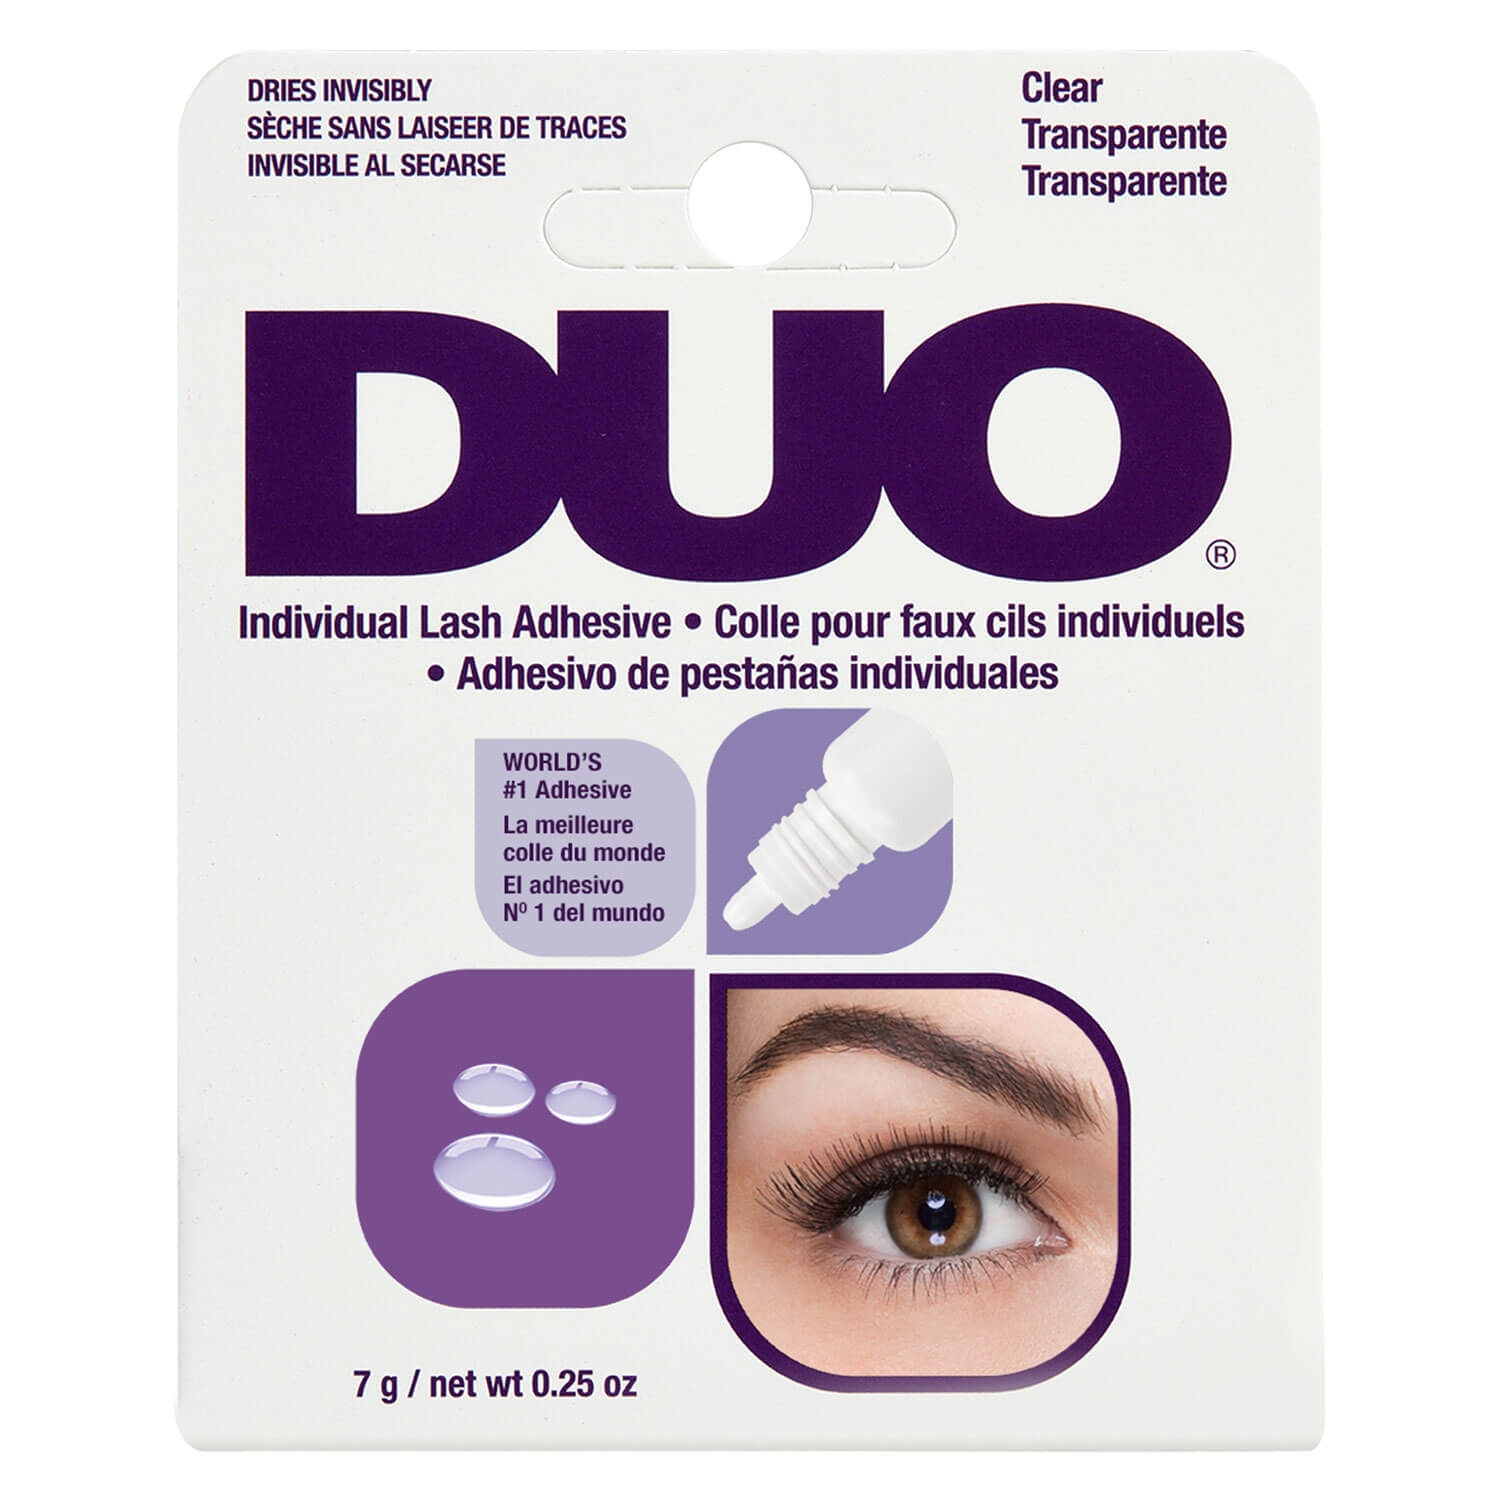 Product image from DUO - Individual Lash Adhesive Clear